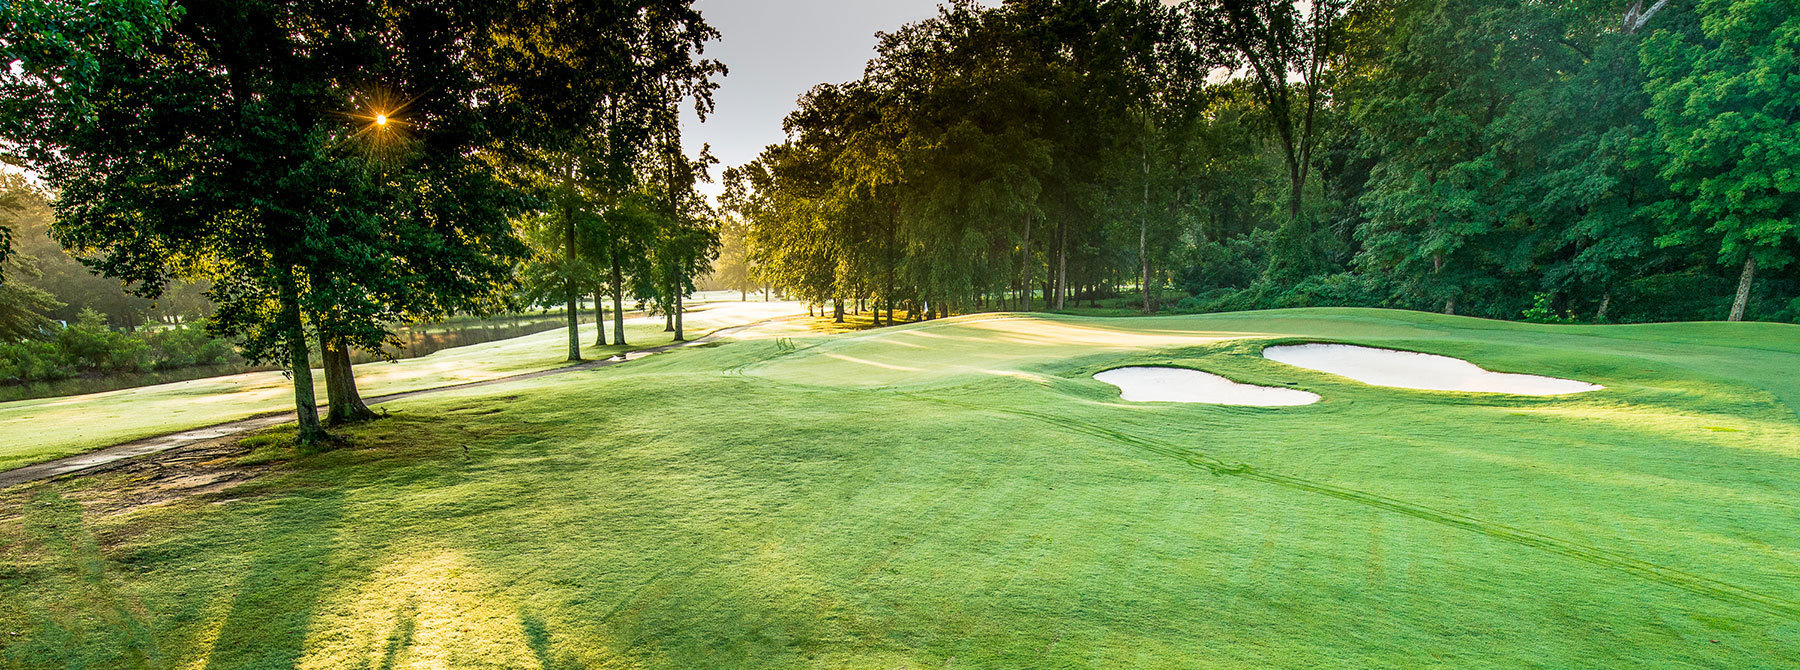 Lochmere Golf Course by TeeWayne Photography